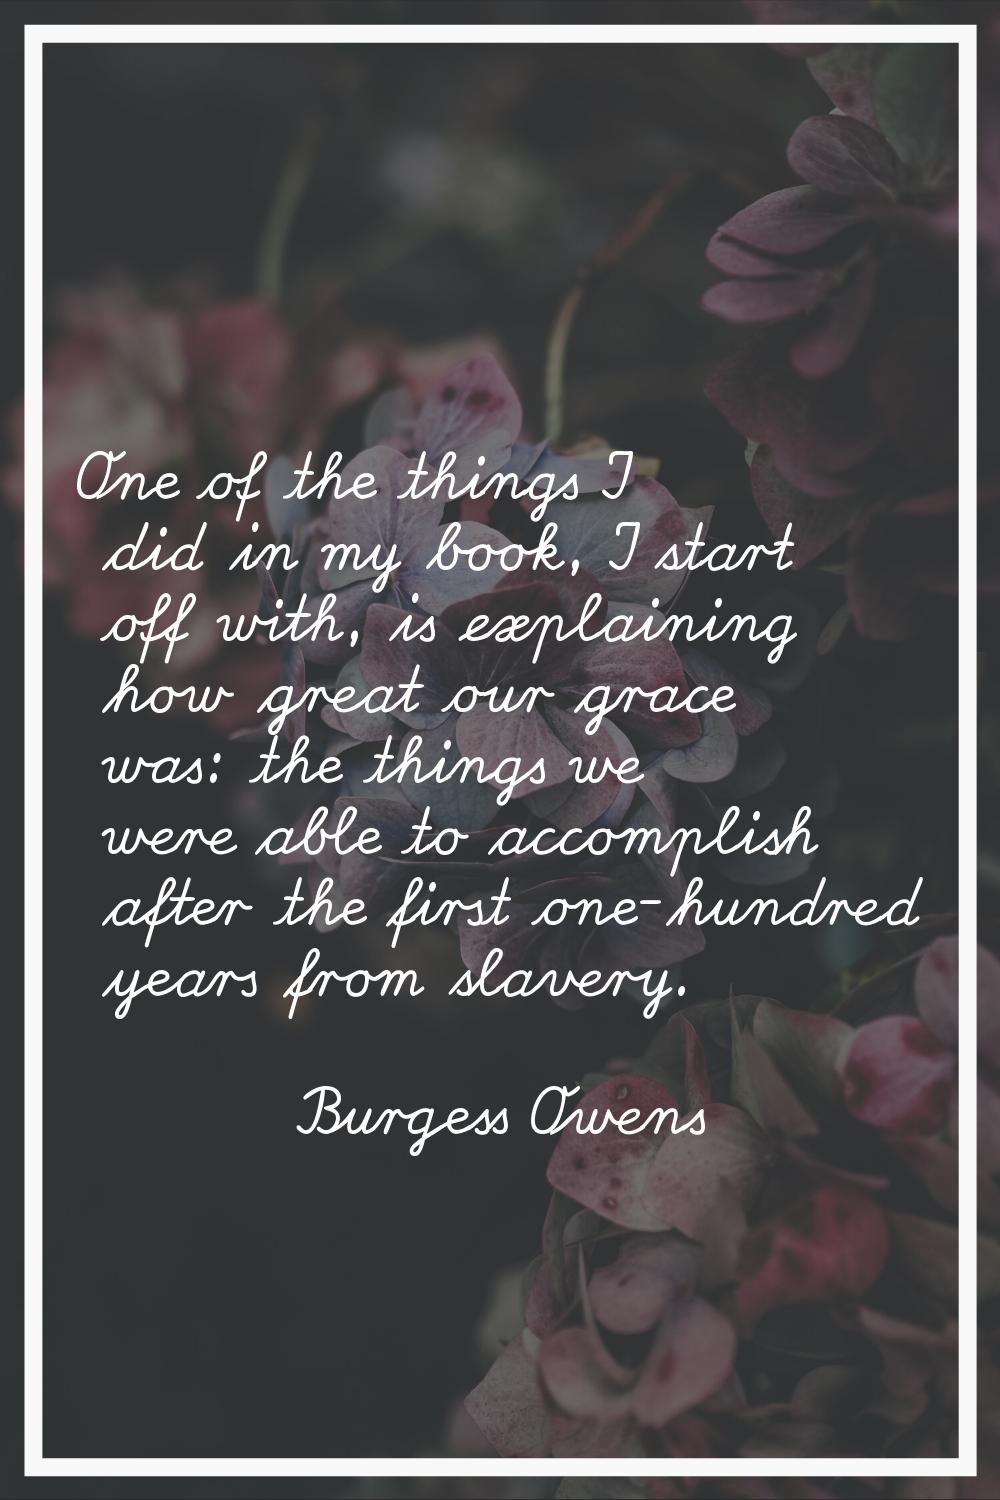 One of the things I did in my book, I start off with, is explaining how great our grace was: the th